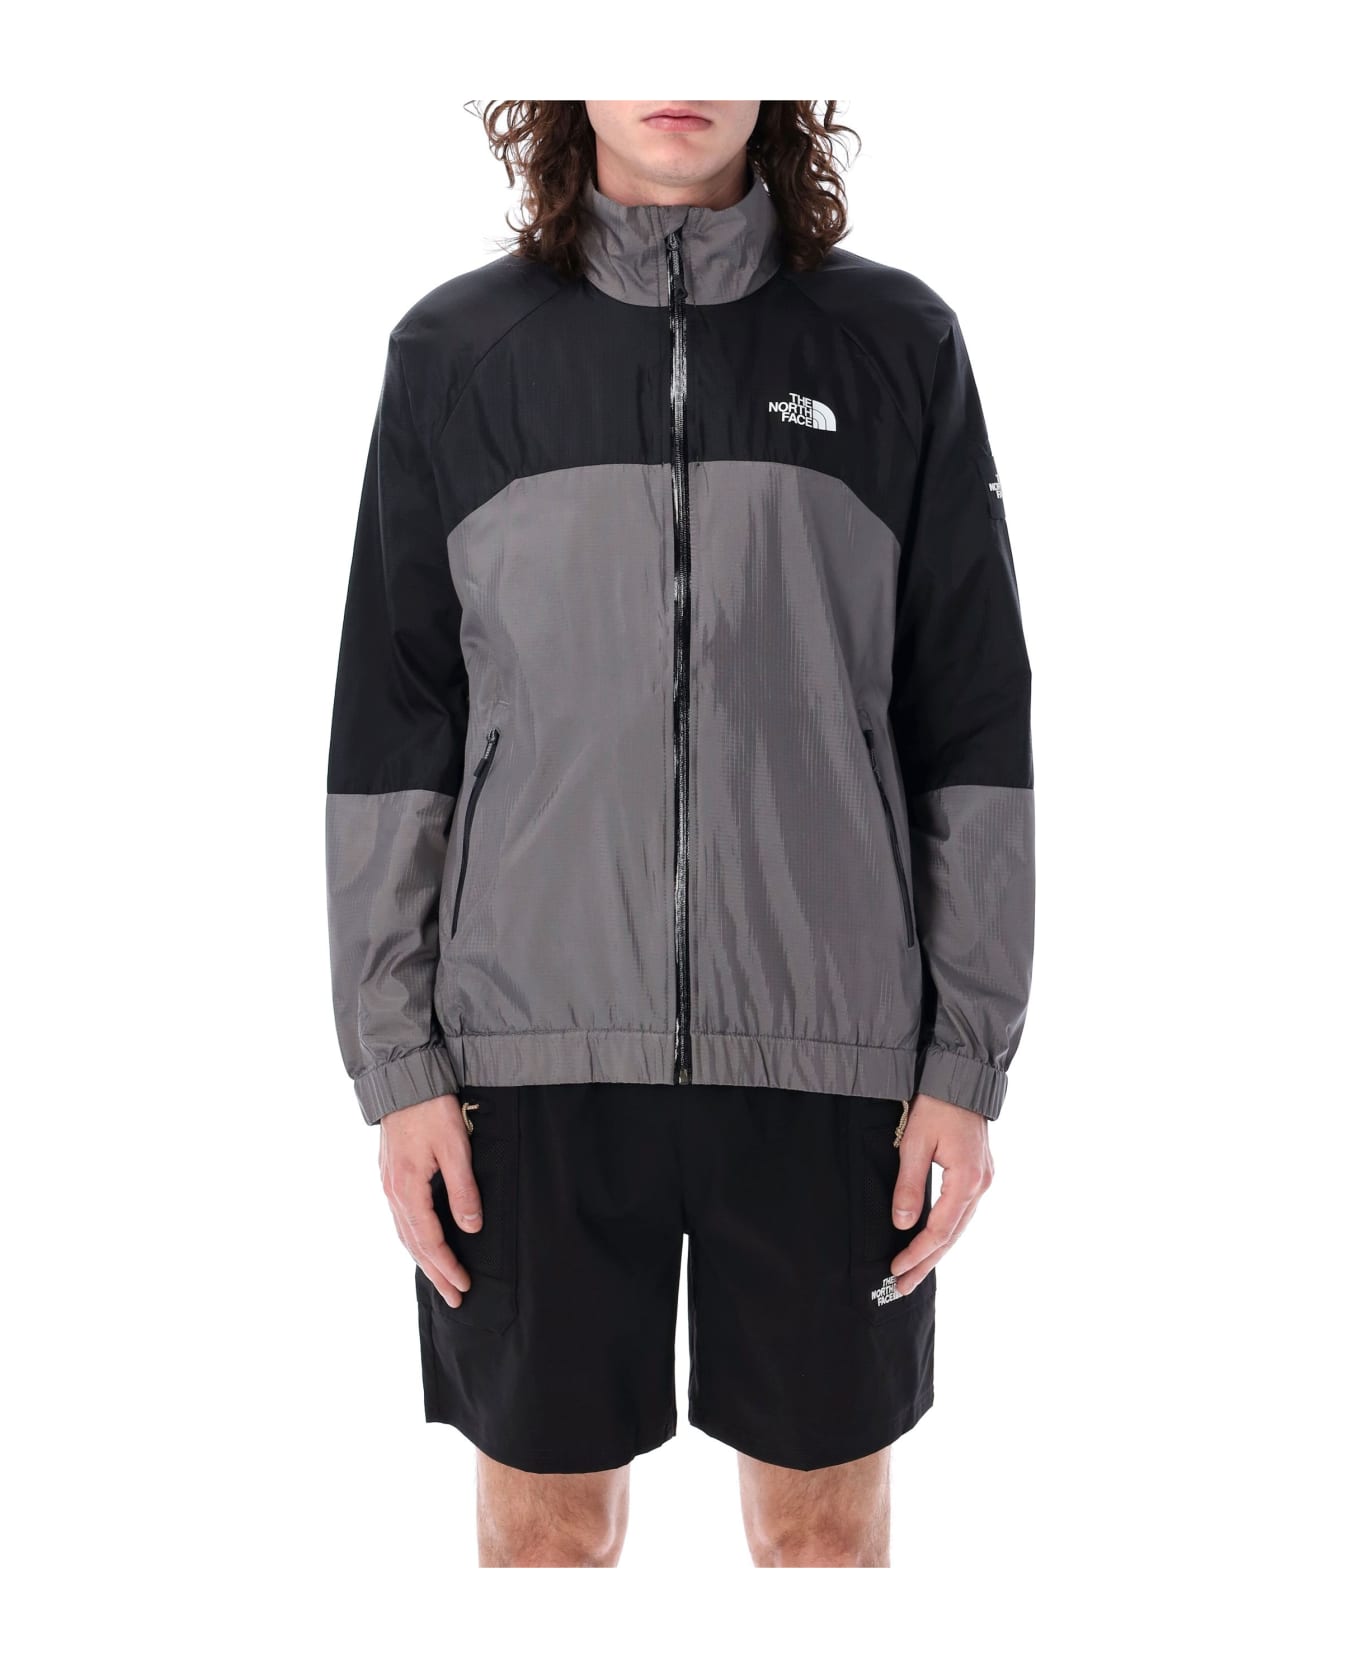 The North Face Wind Shell Full Zip Jacket - GREY